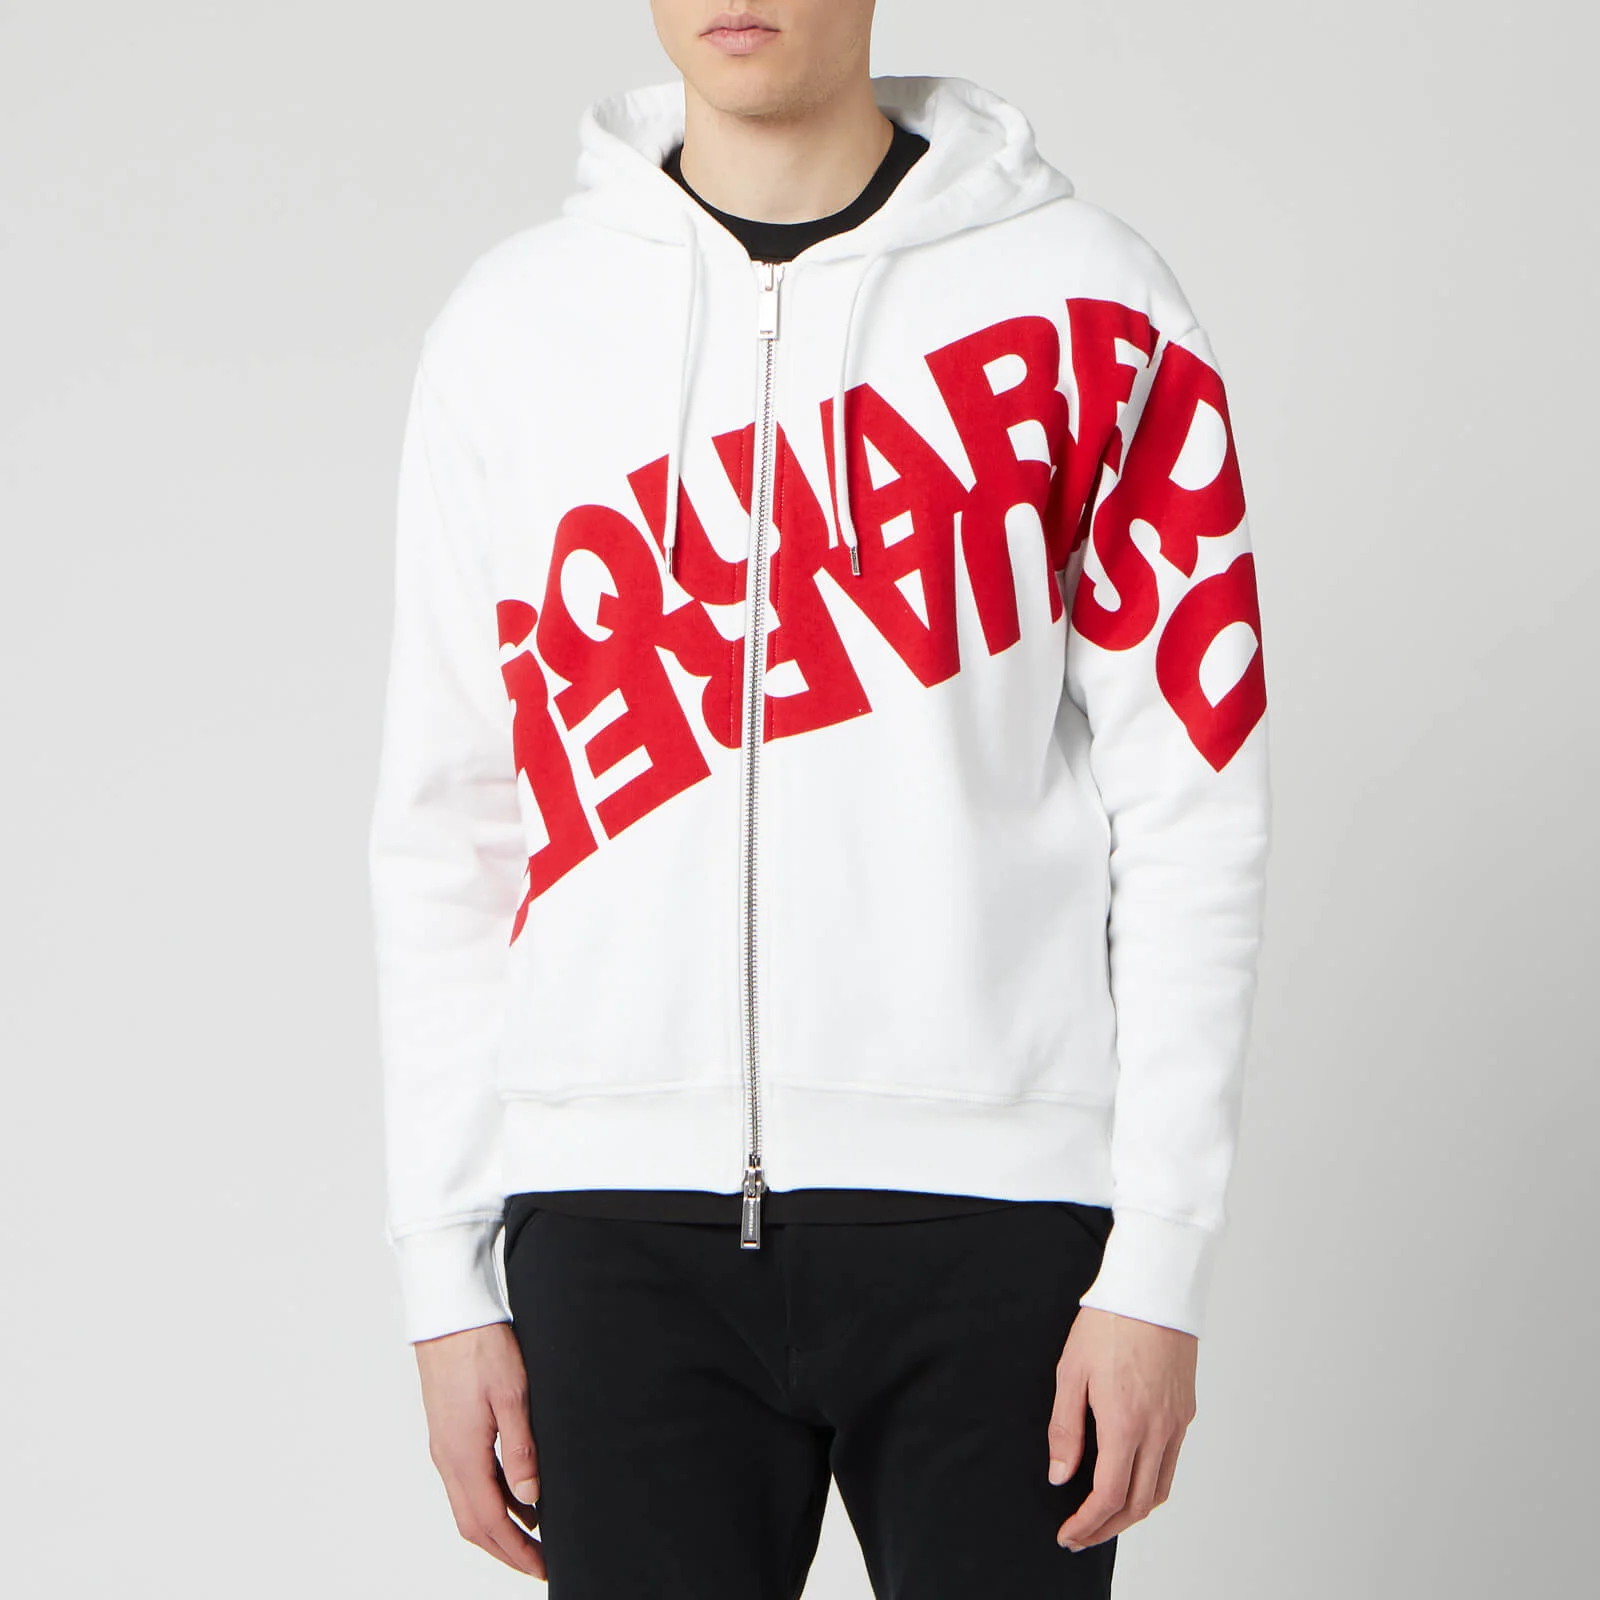 Dsquared2 Men's Angled Mirror Logo Hoody - White/Red Image 1